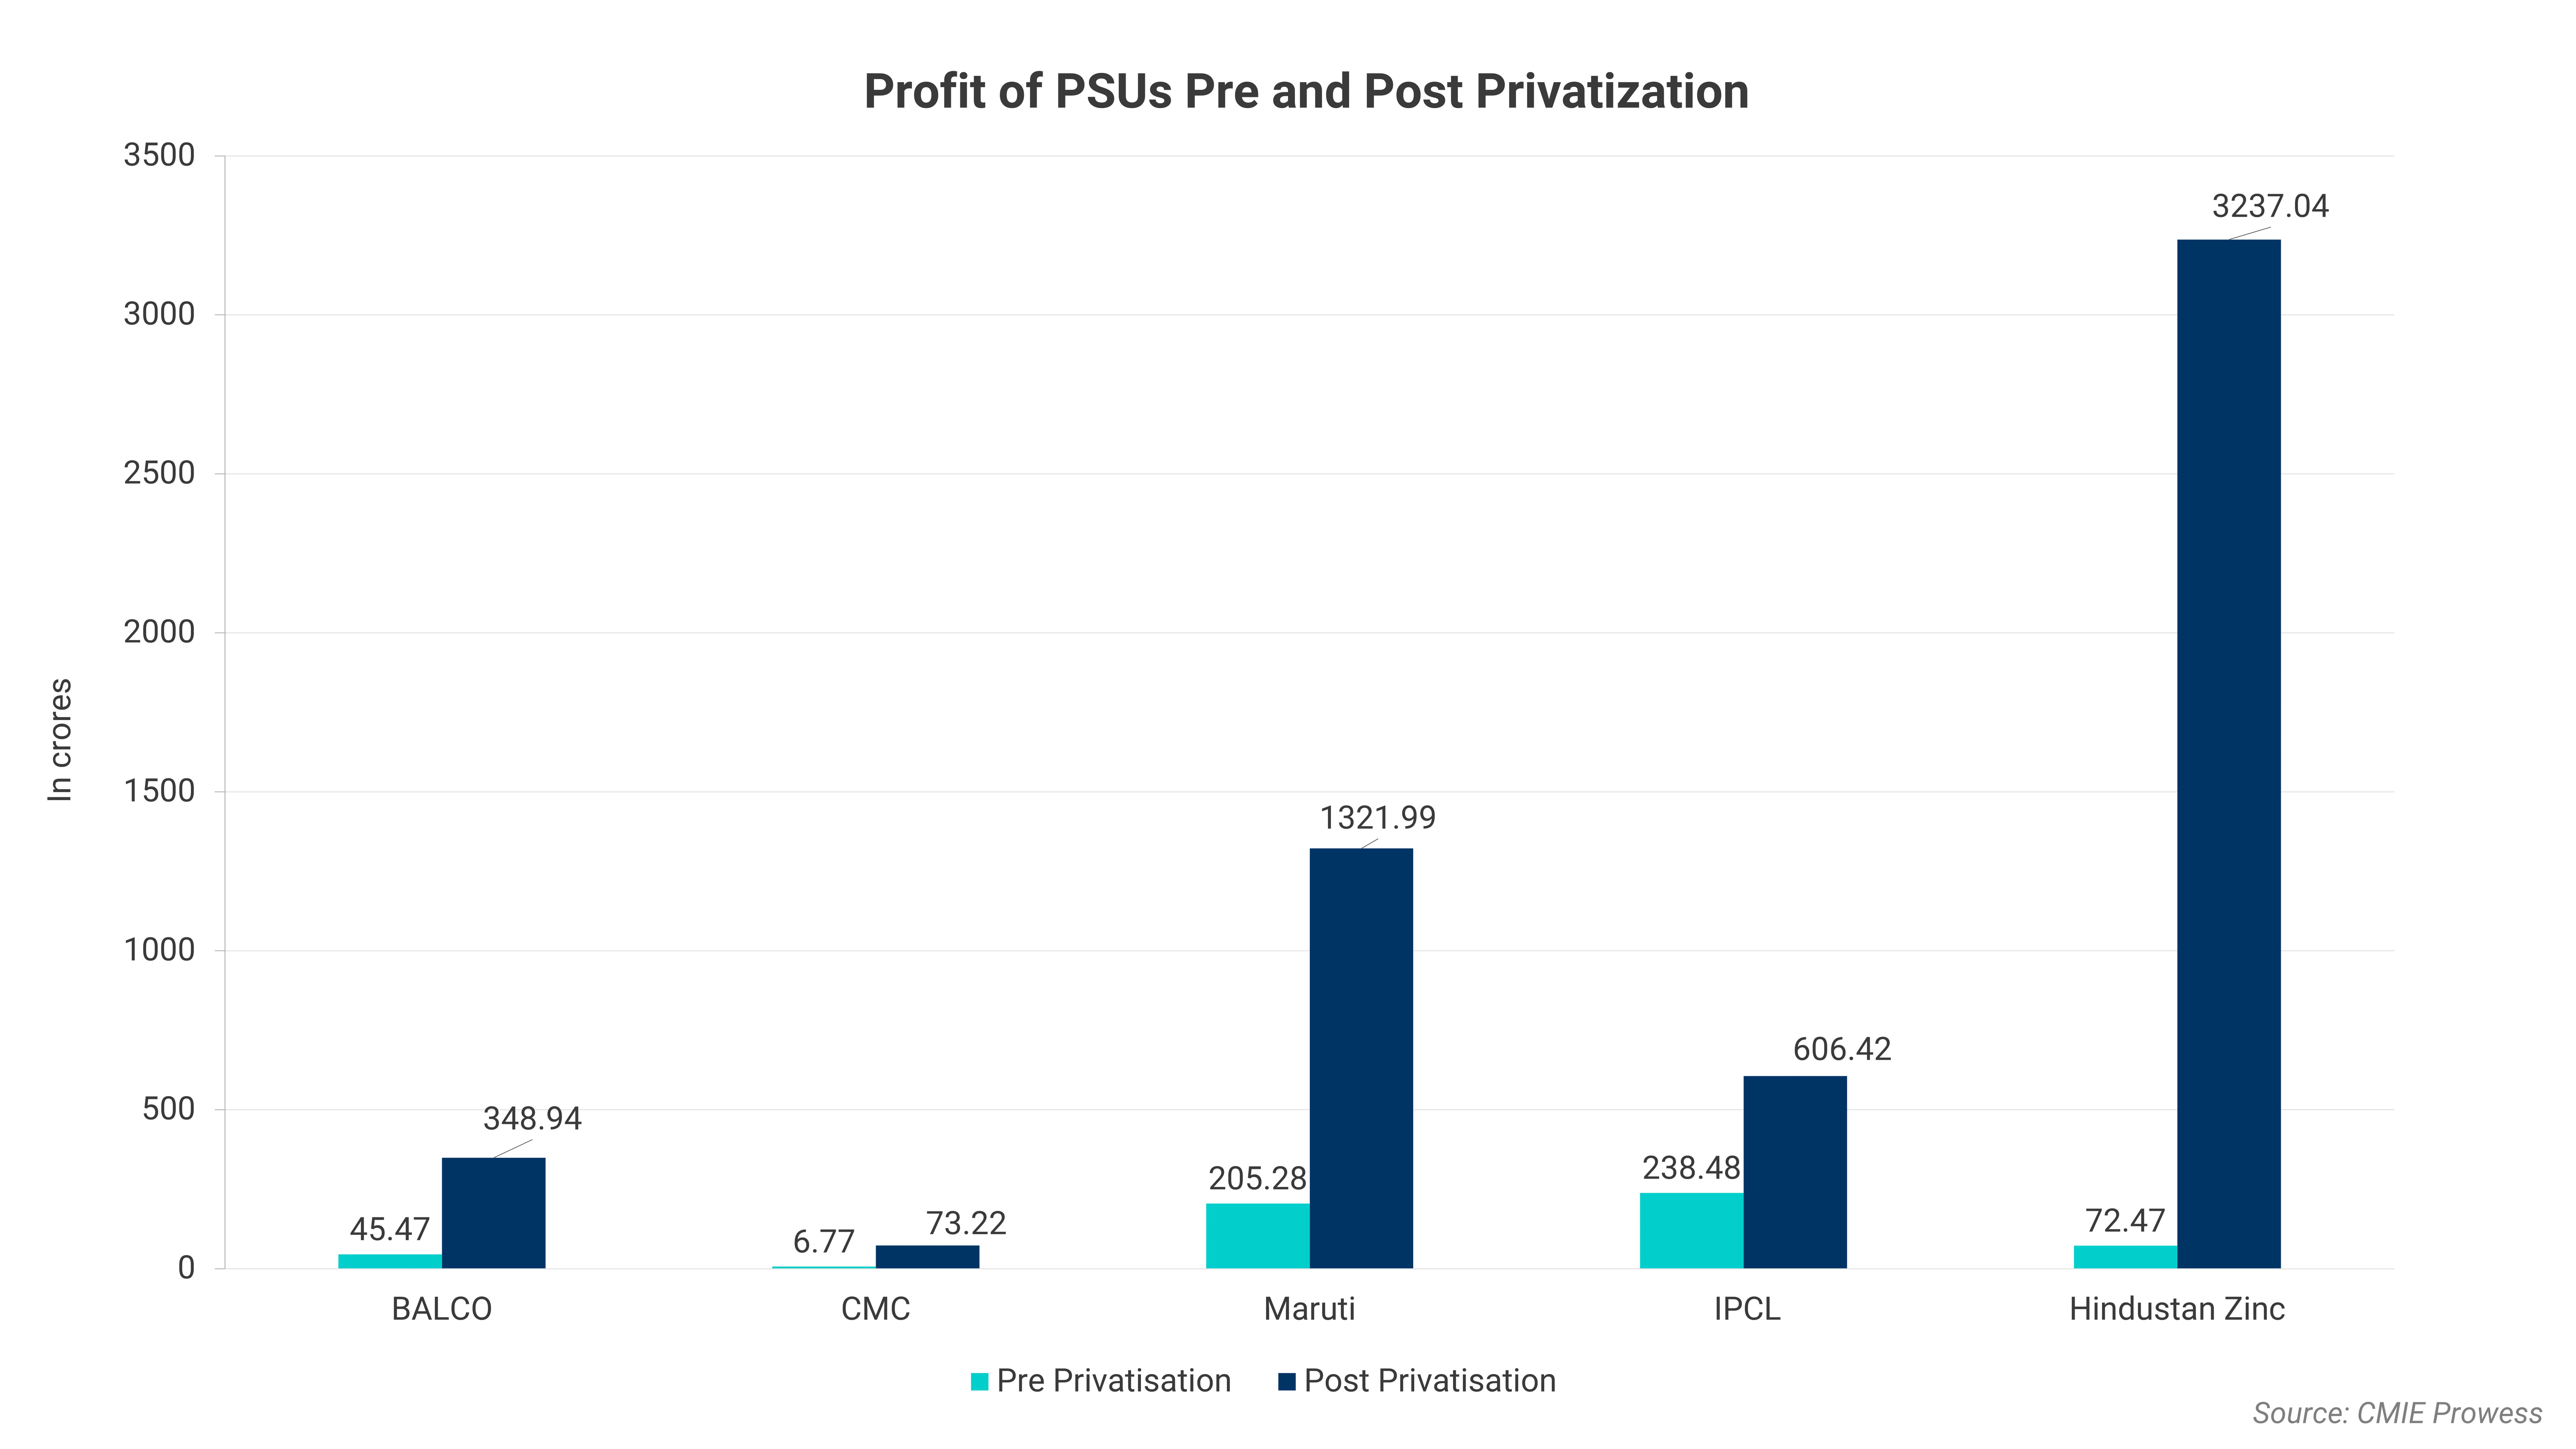 Profit of PSUs Pre and Post Privatization 